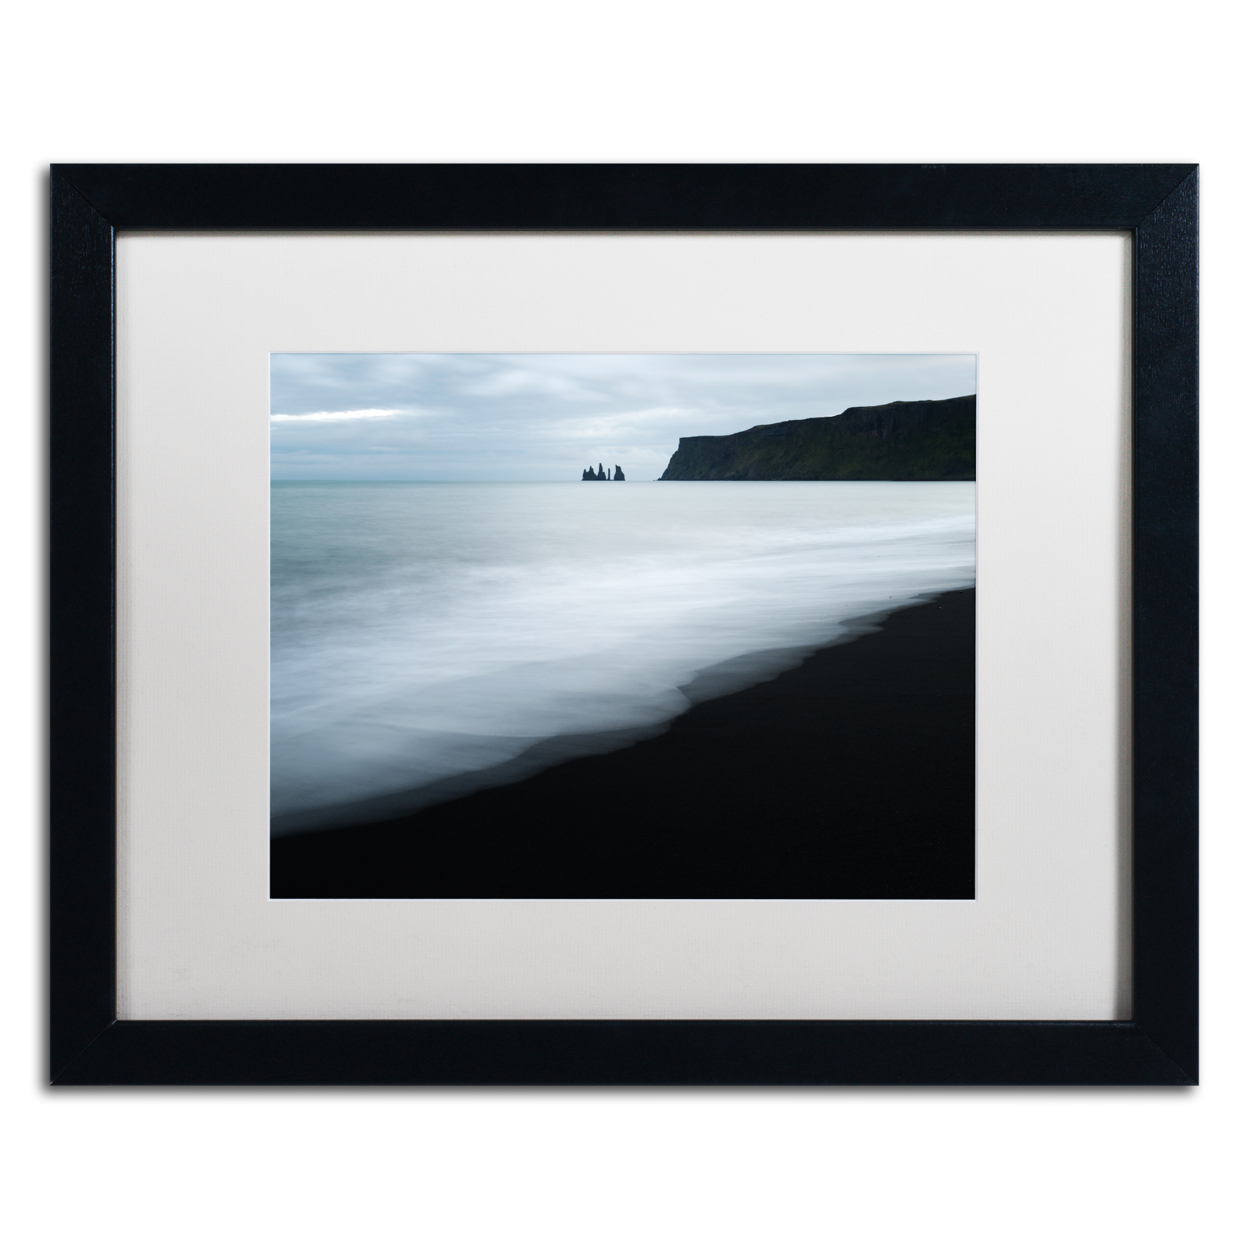 Philippe Sainte-Laudy 'White Waves' Black Wooden Framed Art 18 X 22 Inches